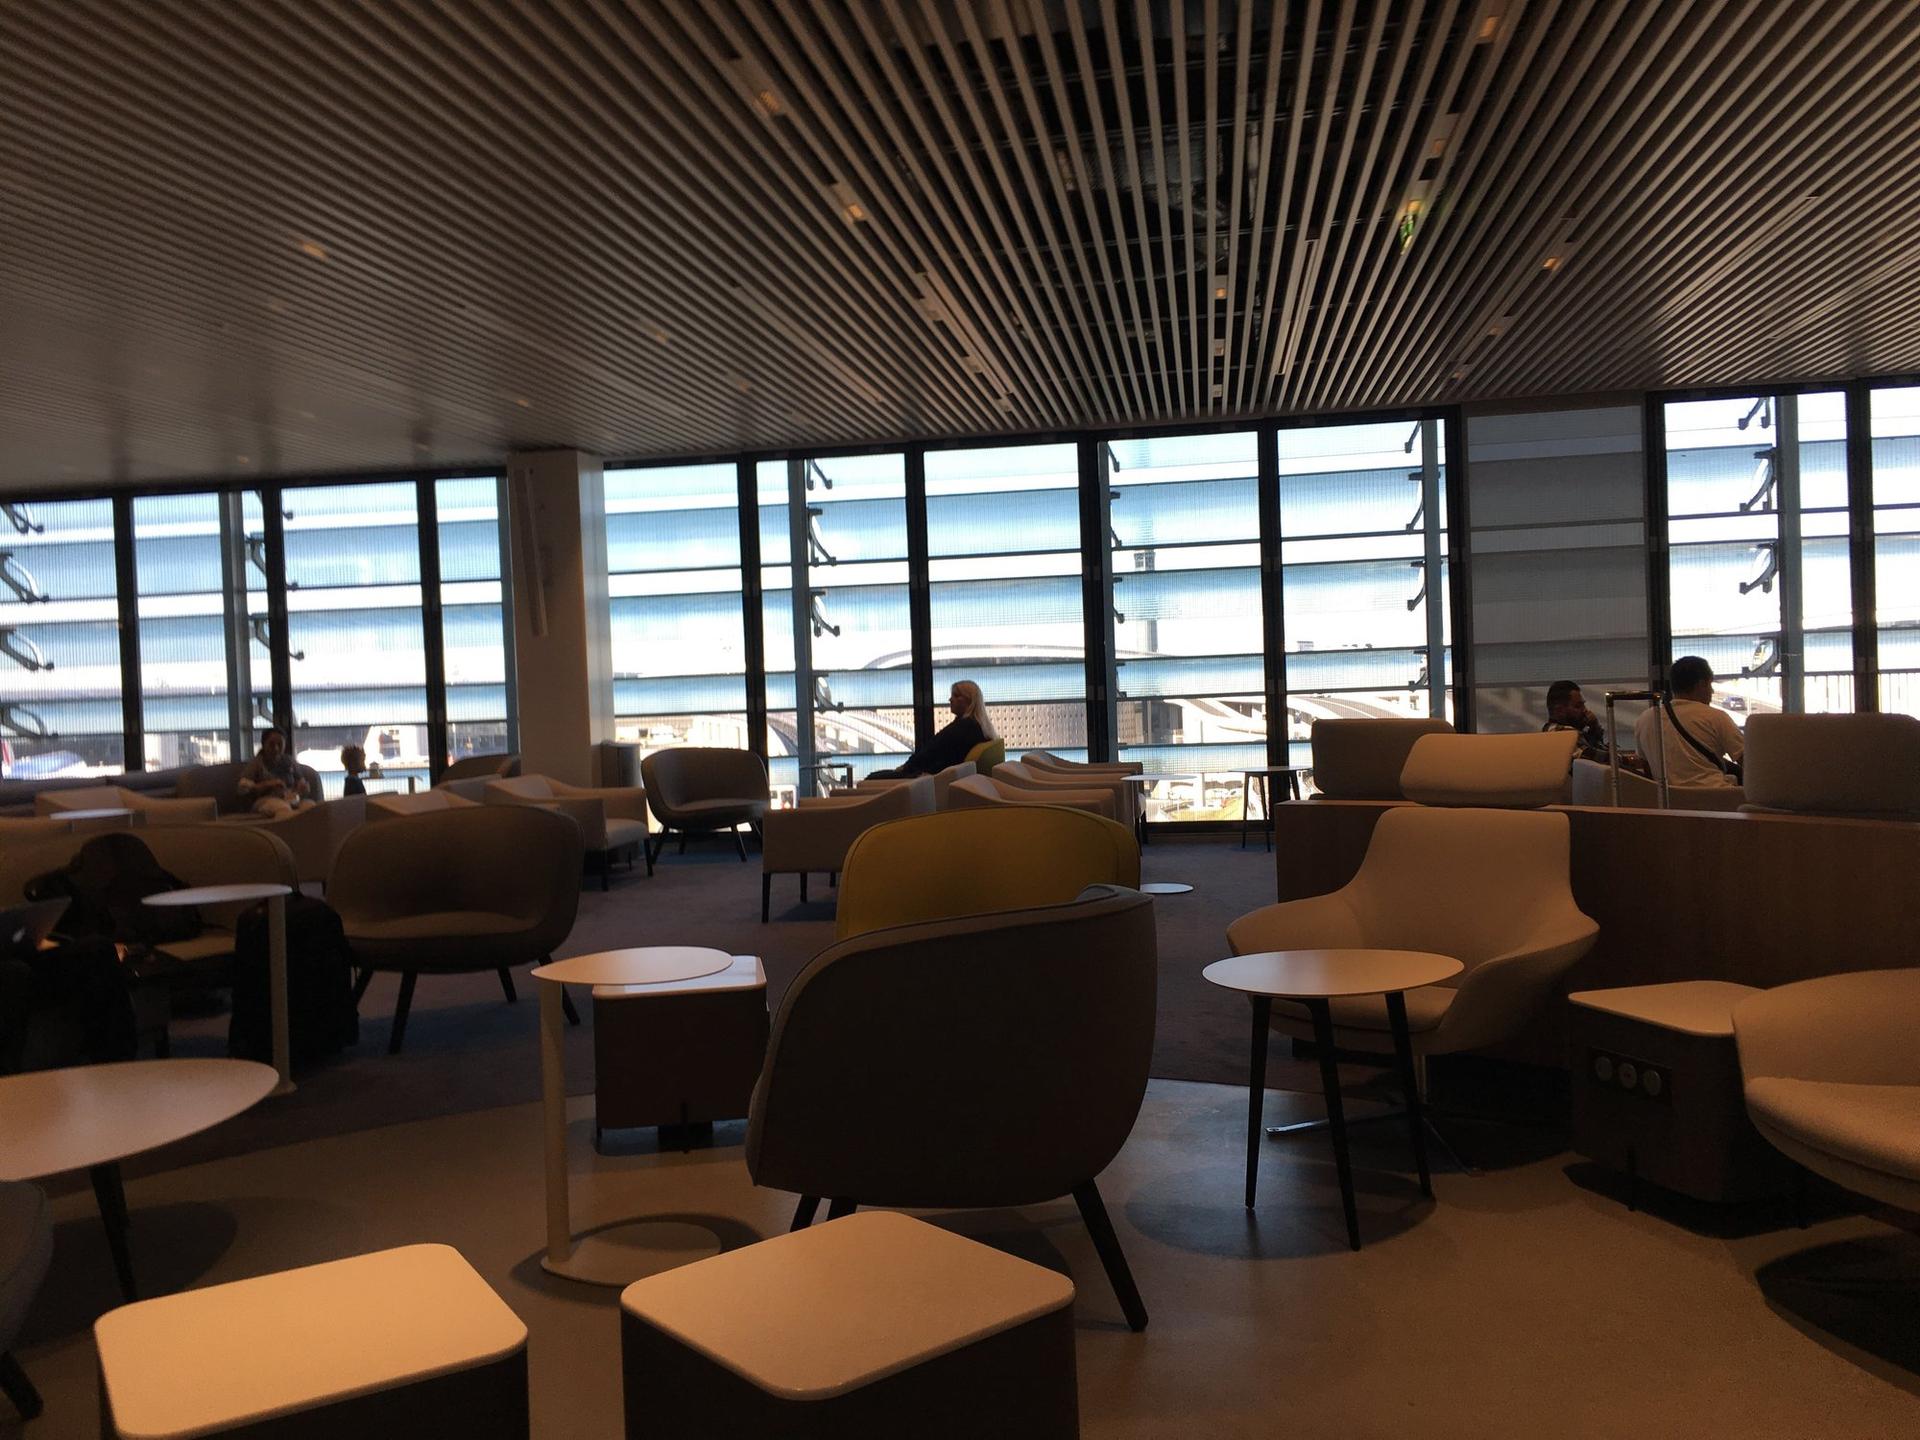 Air France Lounge (Concourse L) image 39 of 57